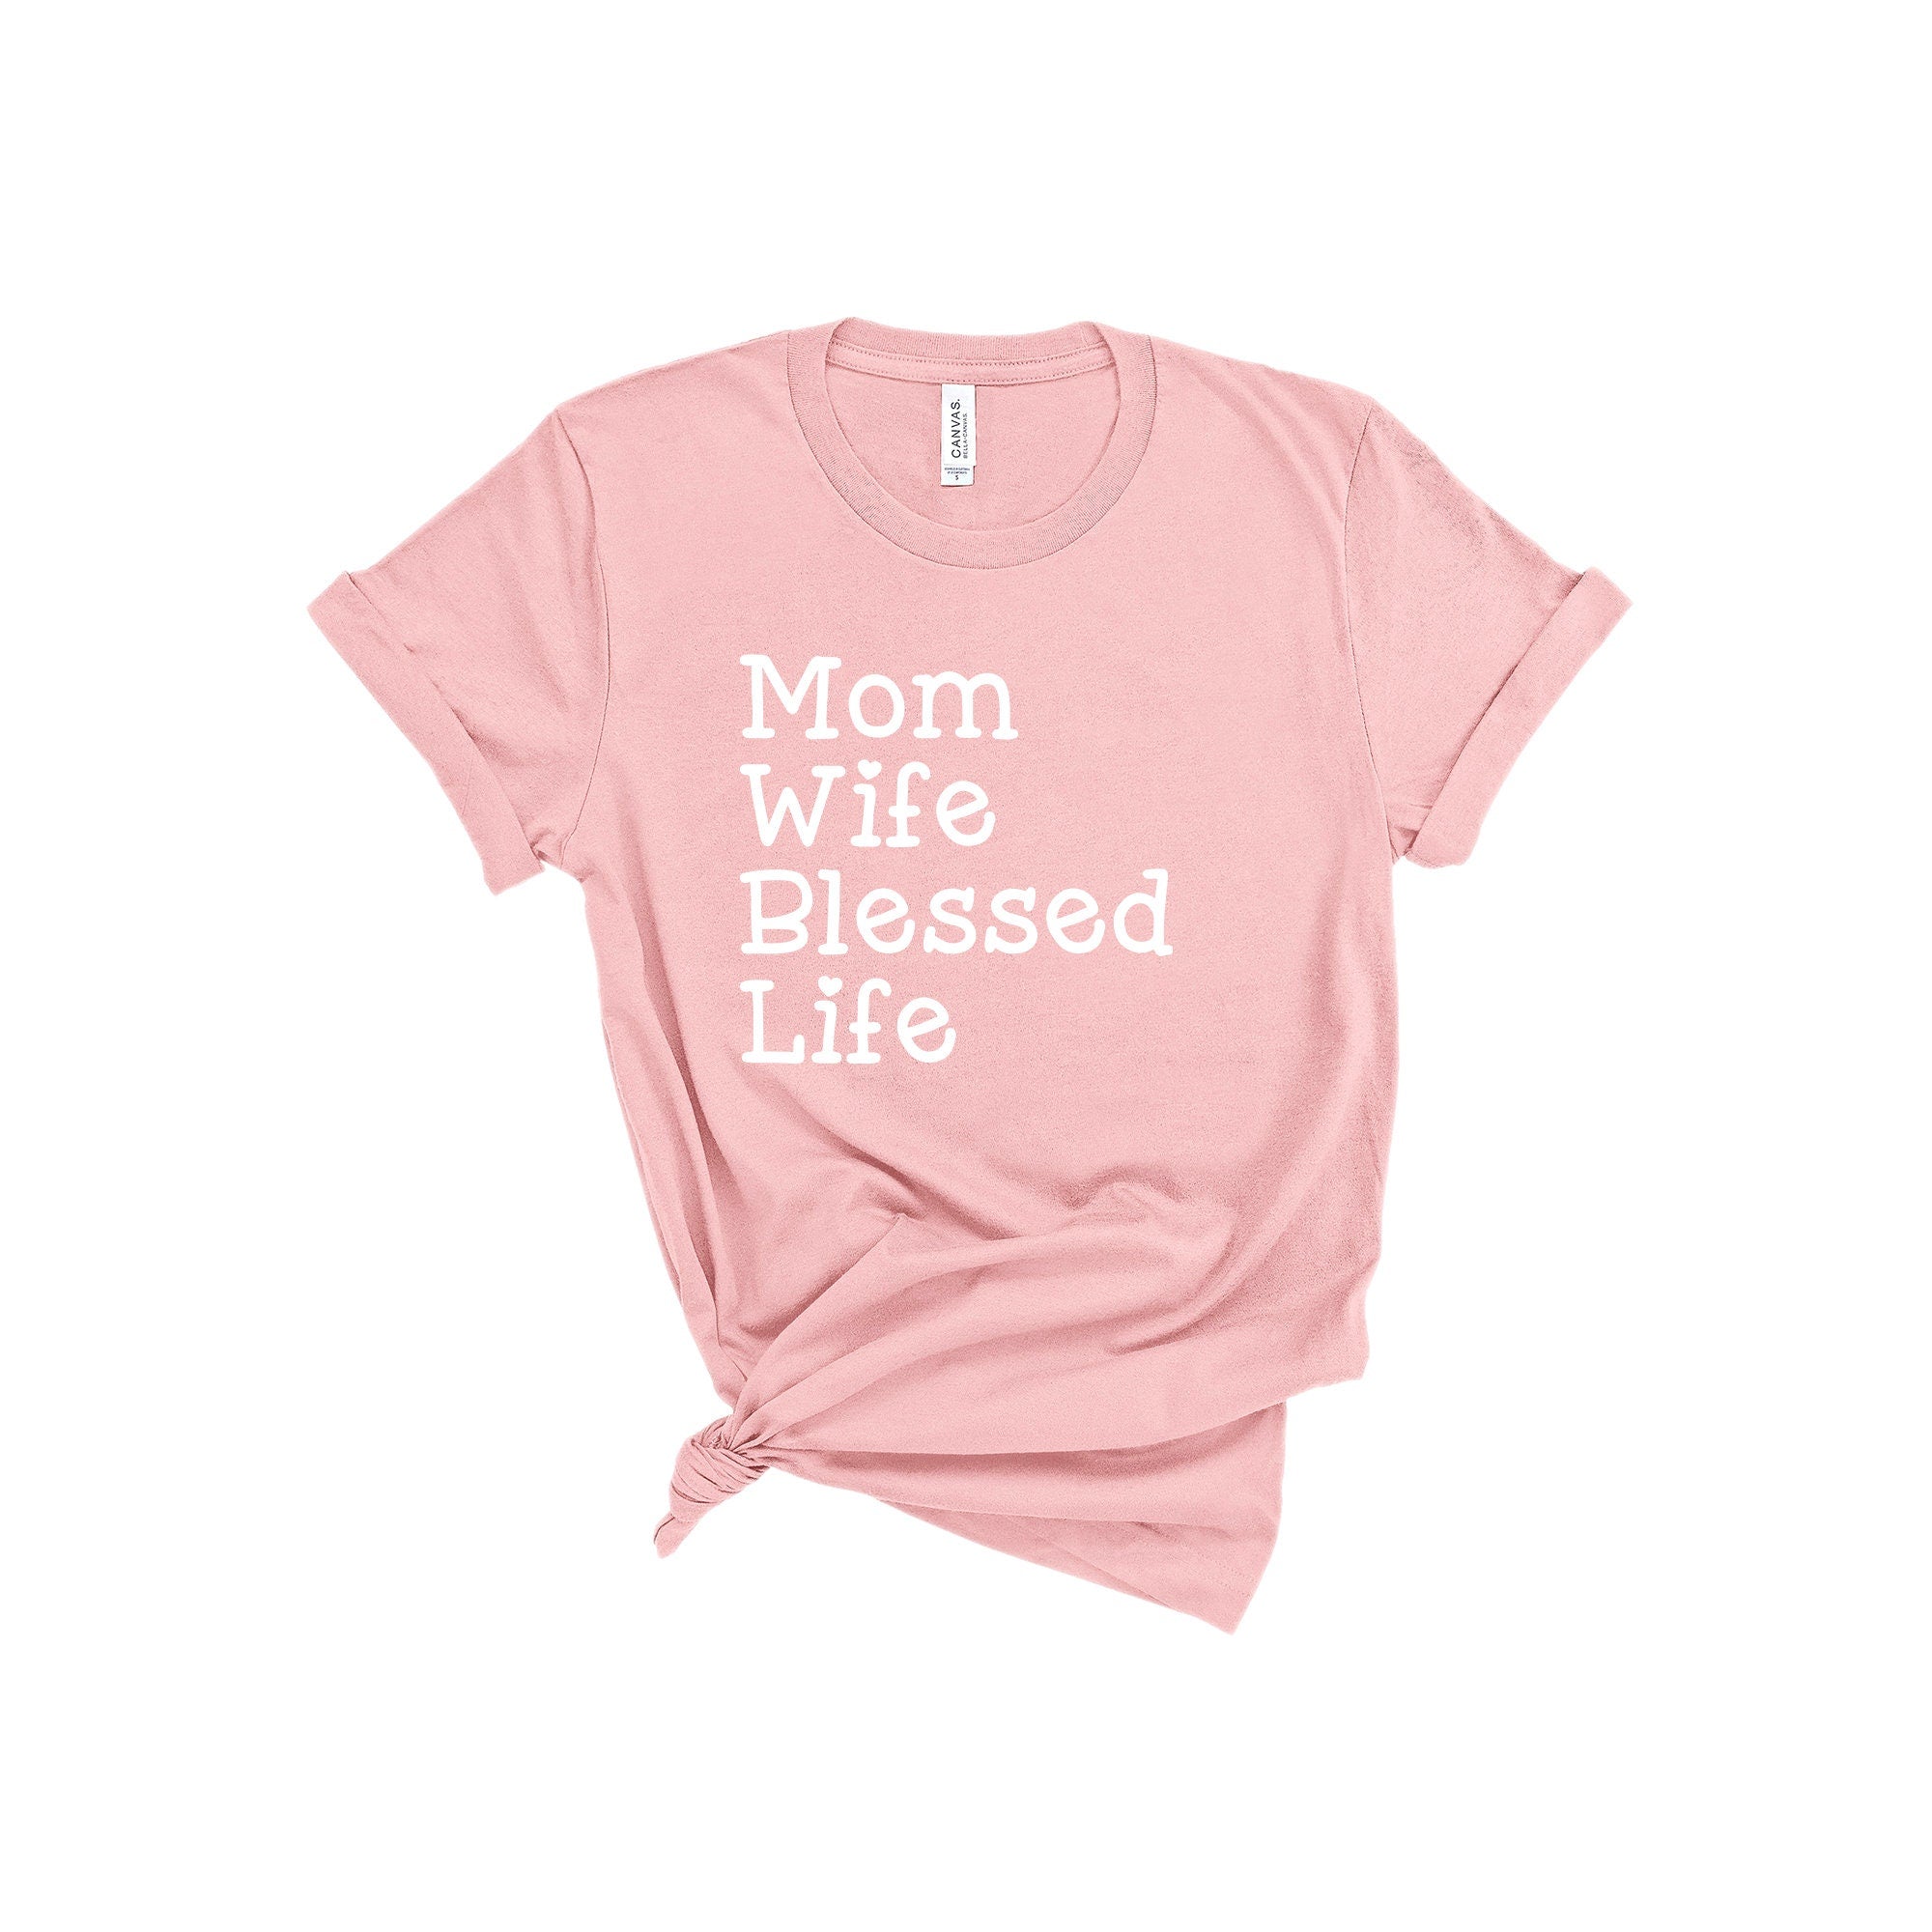 Mom Wife Blessed Life, Gifts for Mom, Mom Shirts, Mom-life Shirt, Shirts for Moms, Trendy Mom T-Shirts, Cool Mom Shirts, Shirts for Moms